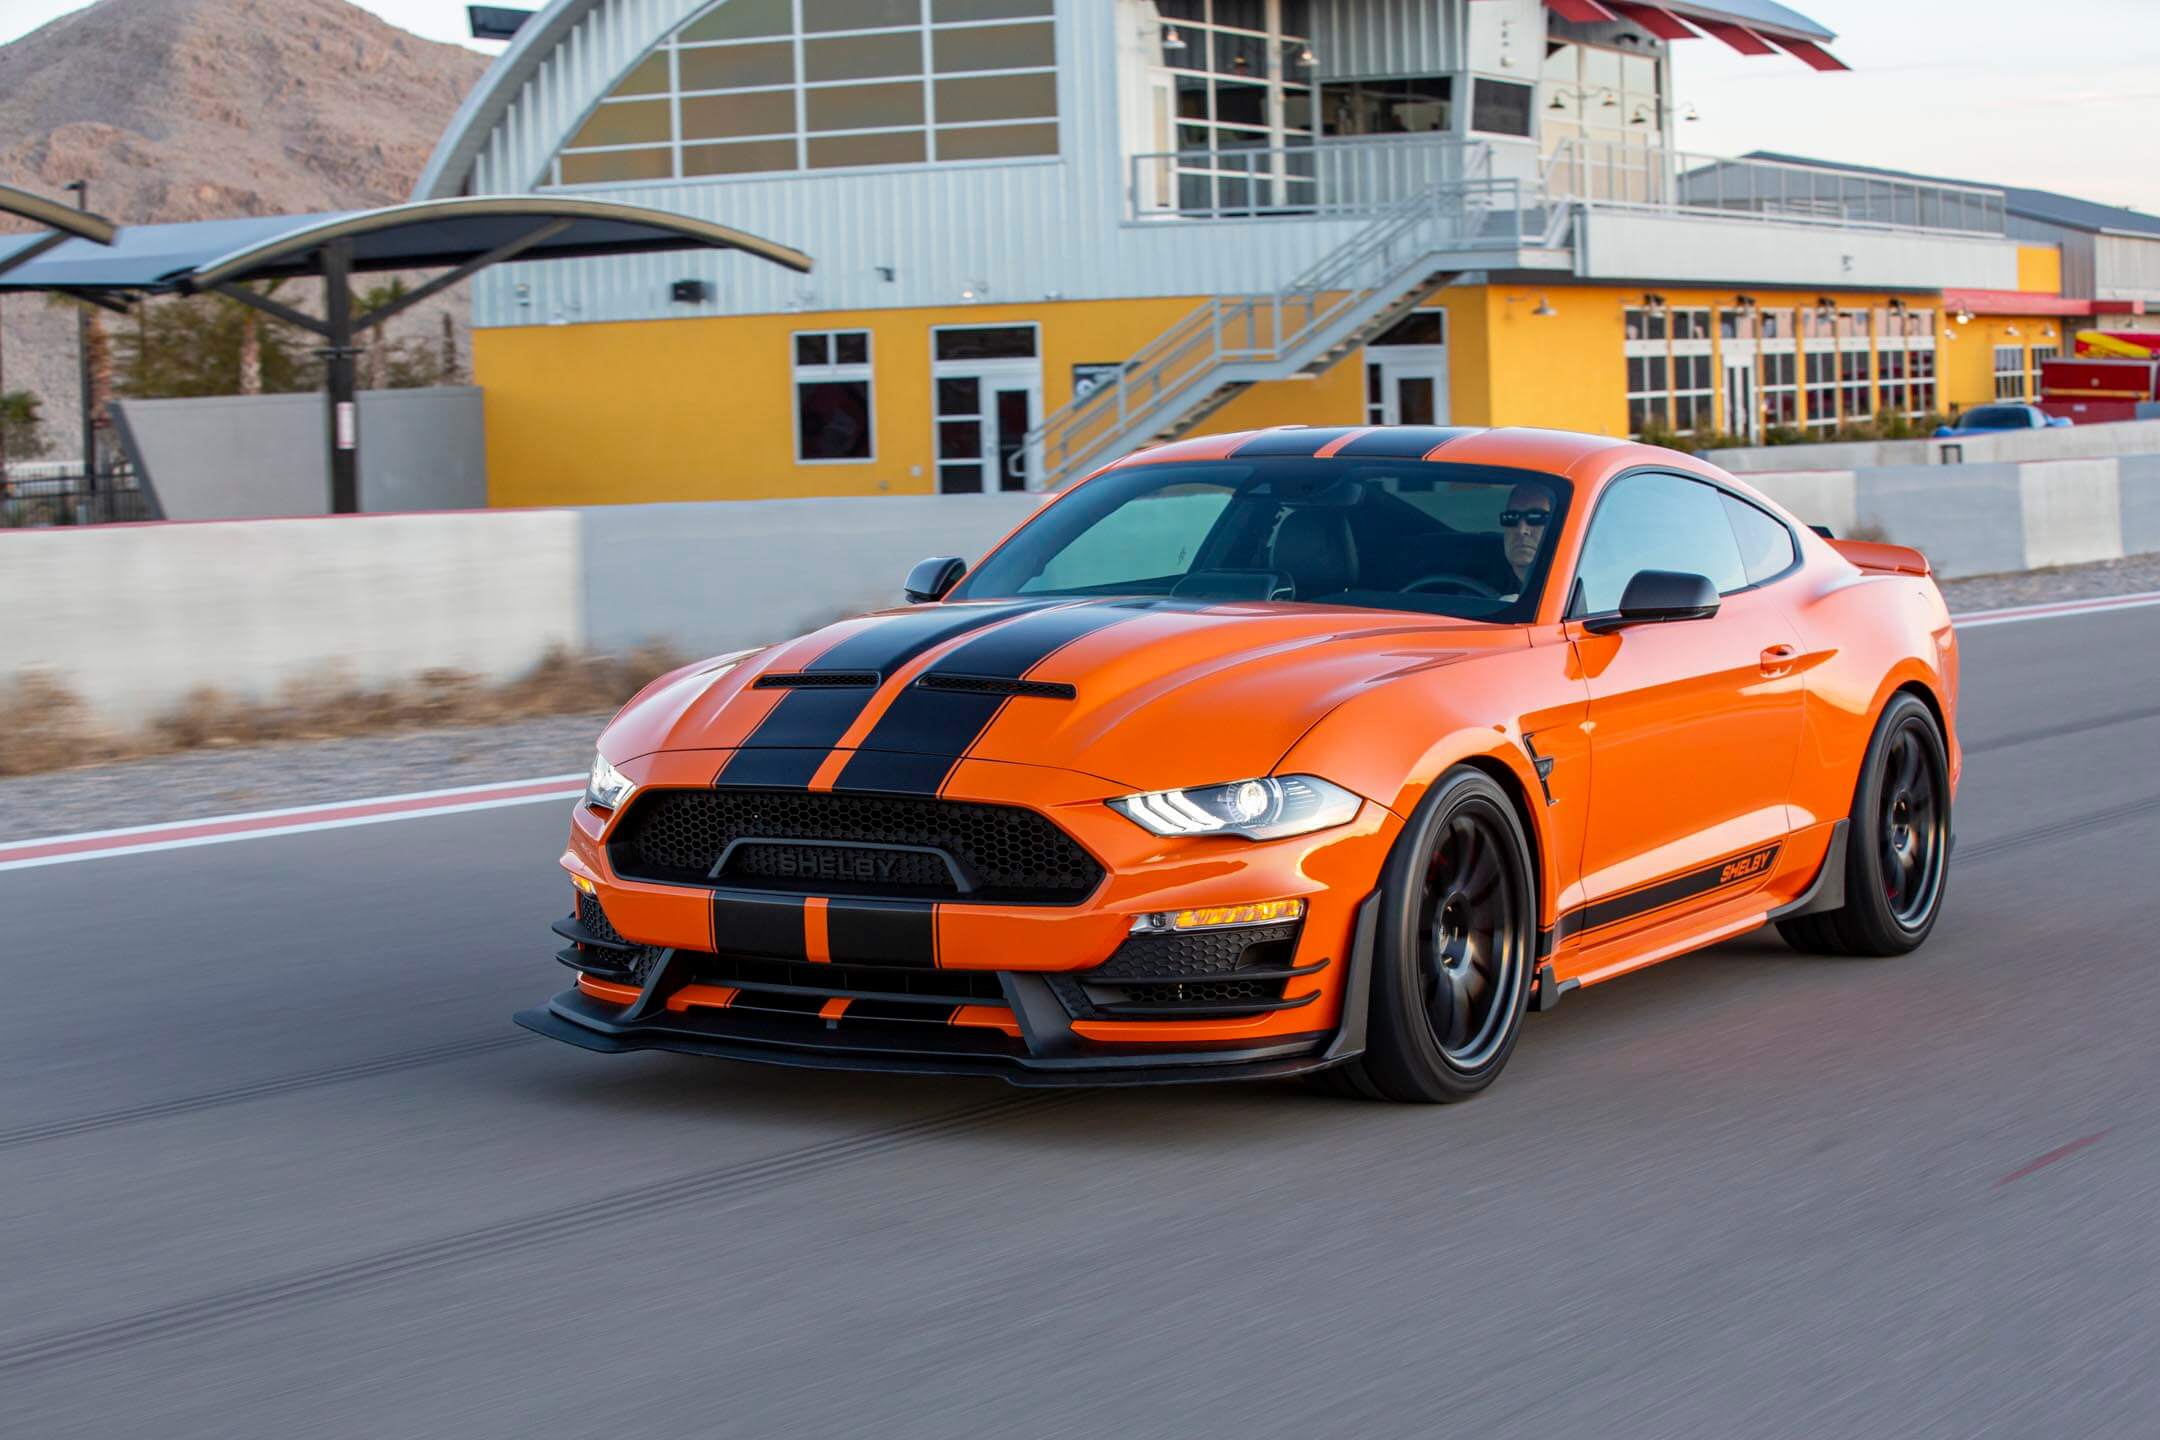 Shelby Signs Off On Fitting Tribute To Texas Tuner